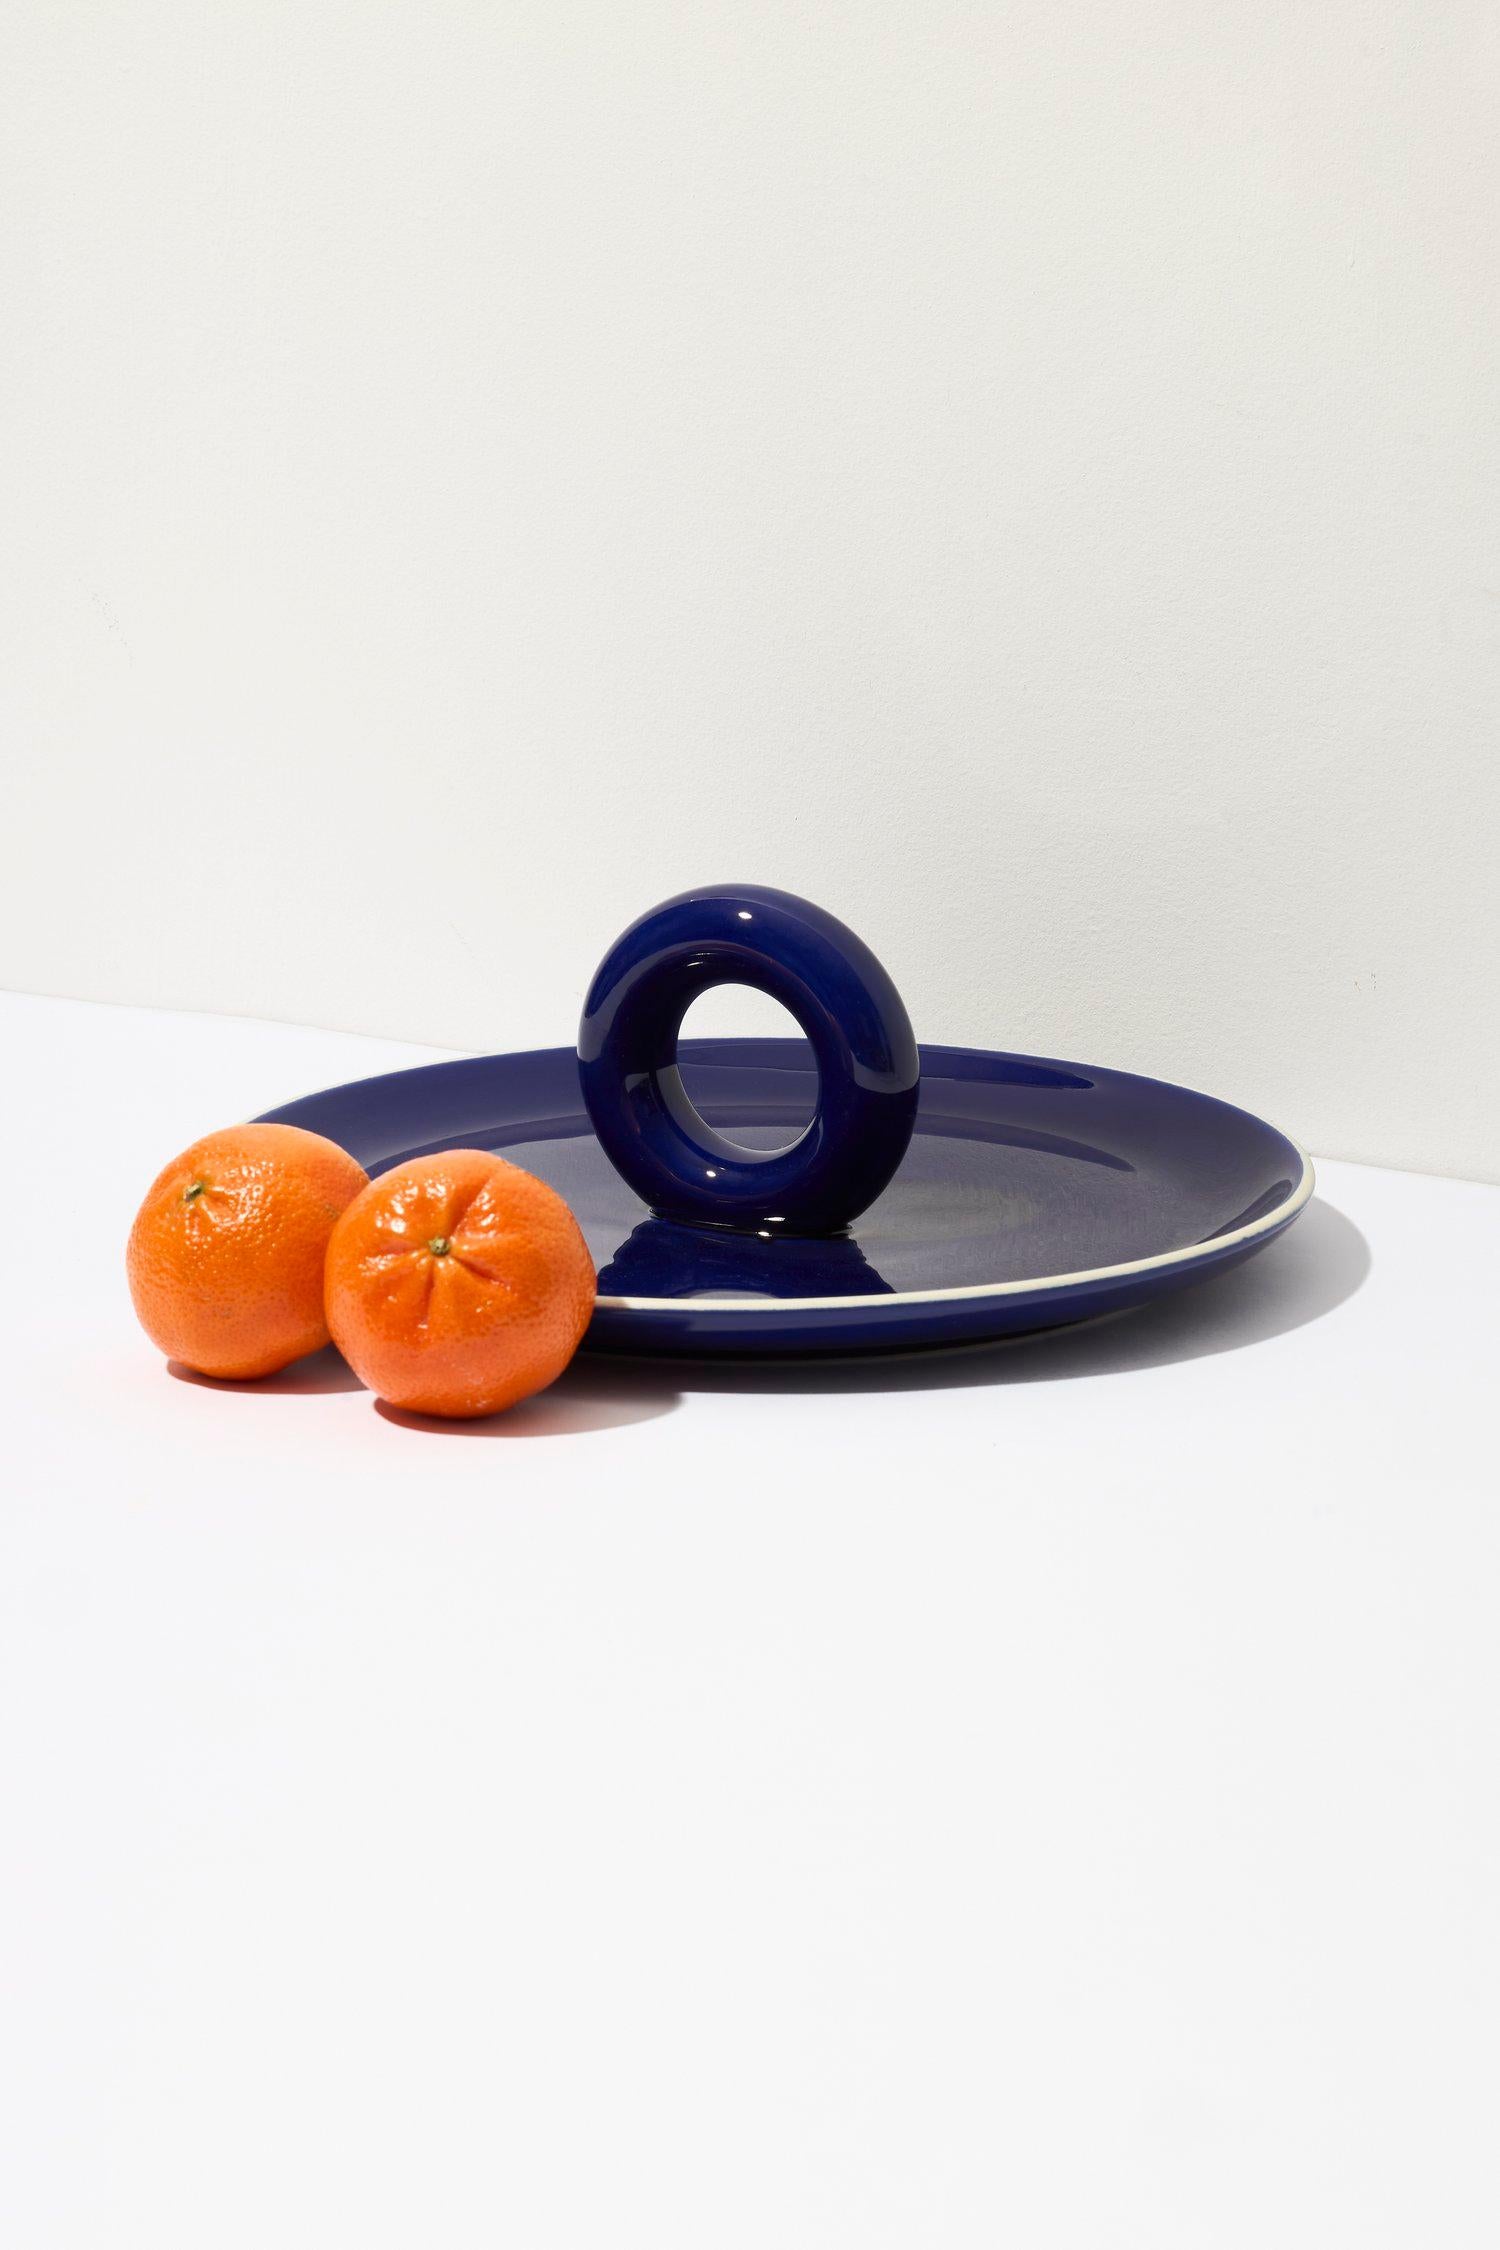 ANIELA can be described in three words: perfect-fruit-plate! Of course, it works just as well for serving sweets or savory snacks. Its wide base and a funny pretzel-shaped handle gain a distinctive character thanks to the intense glaze color. The